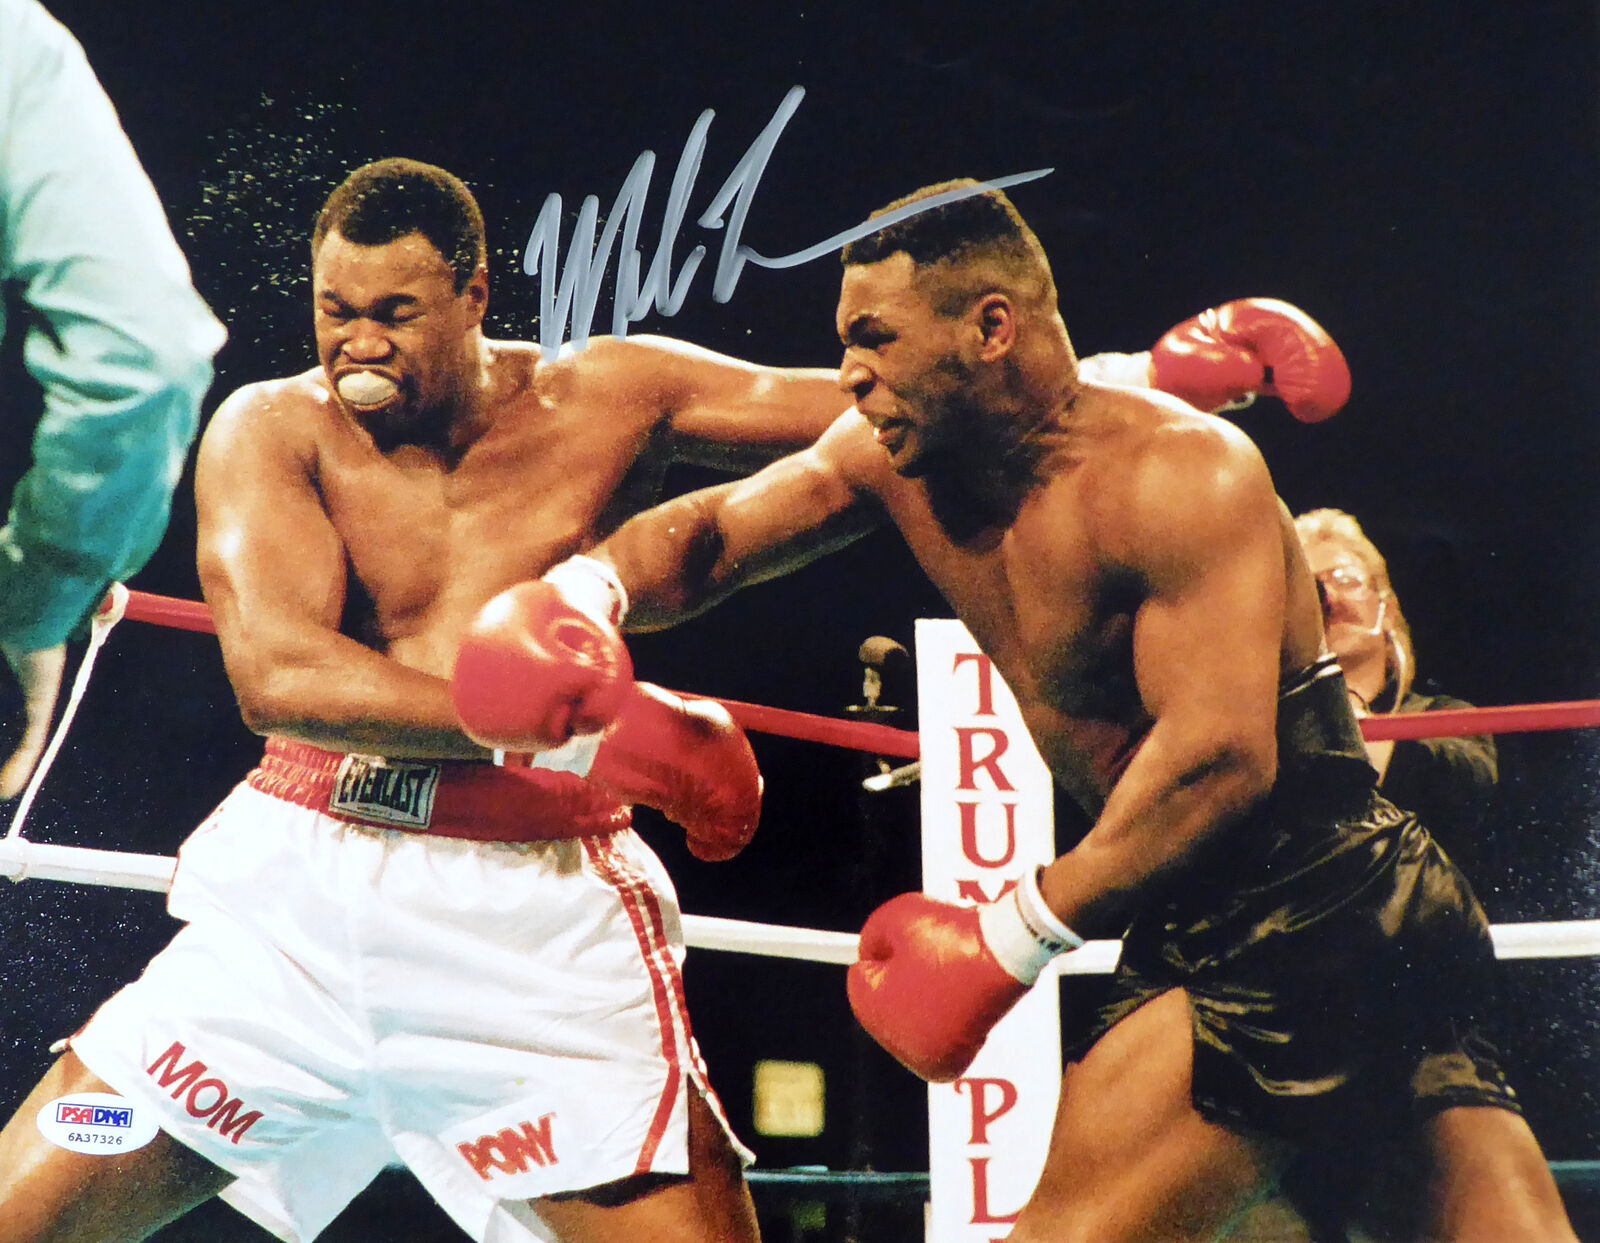 Mike Tyson Autographed Signed 11x14 Photo (crease) Psa/dna #6a37326